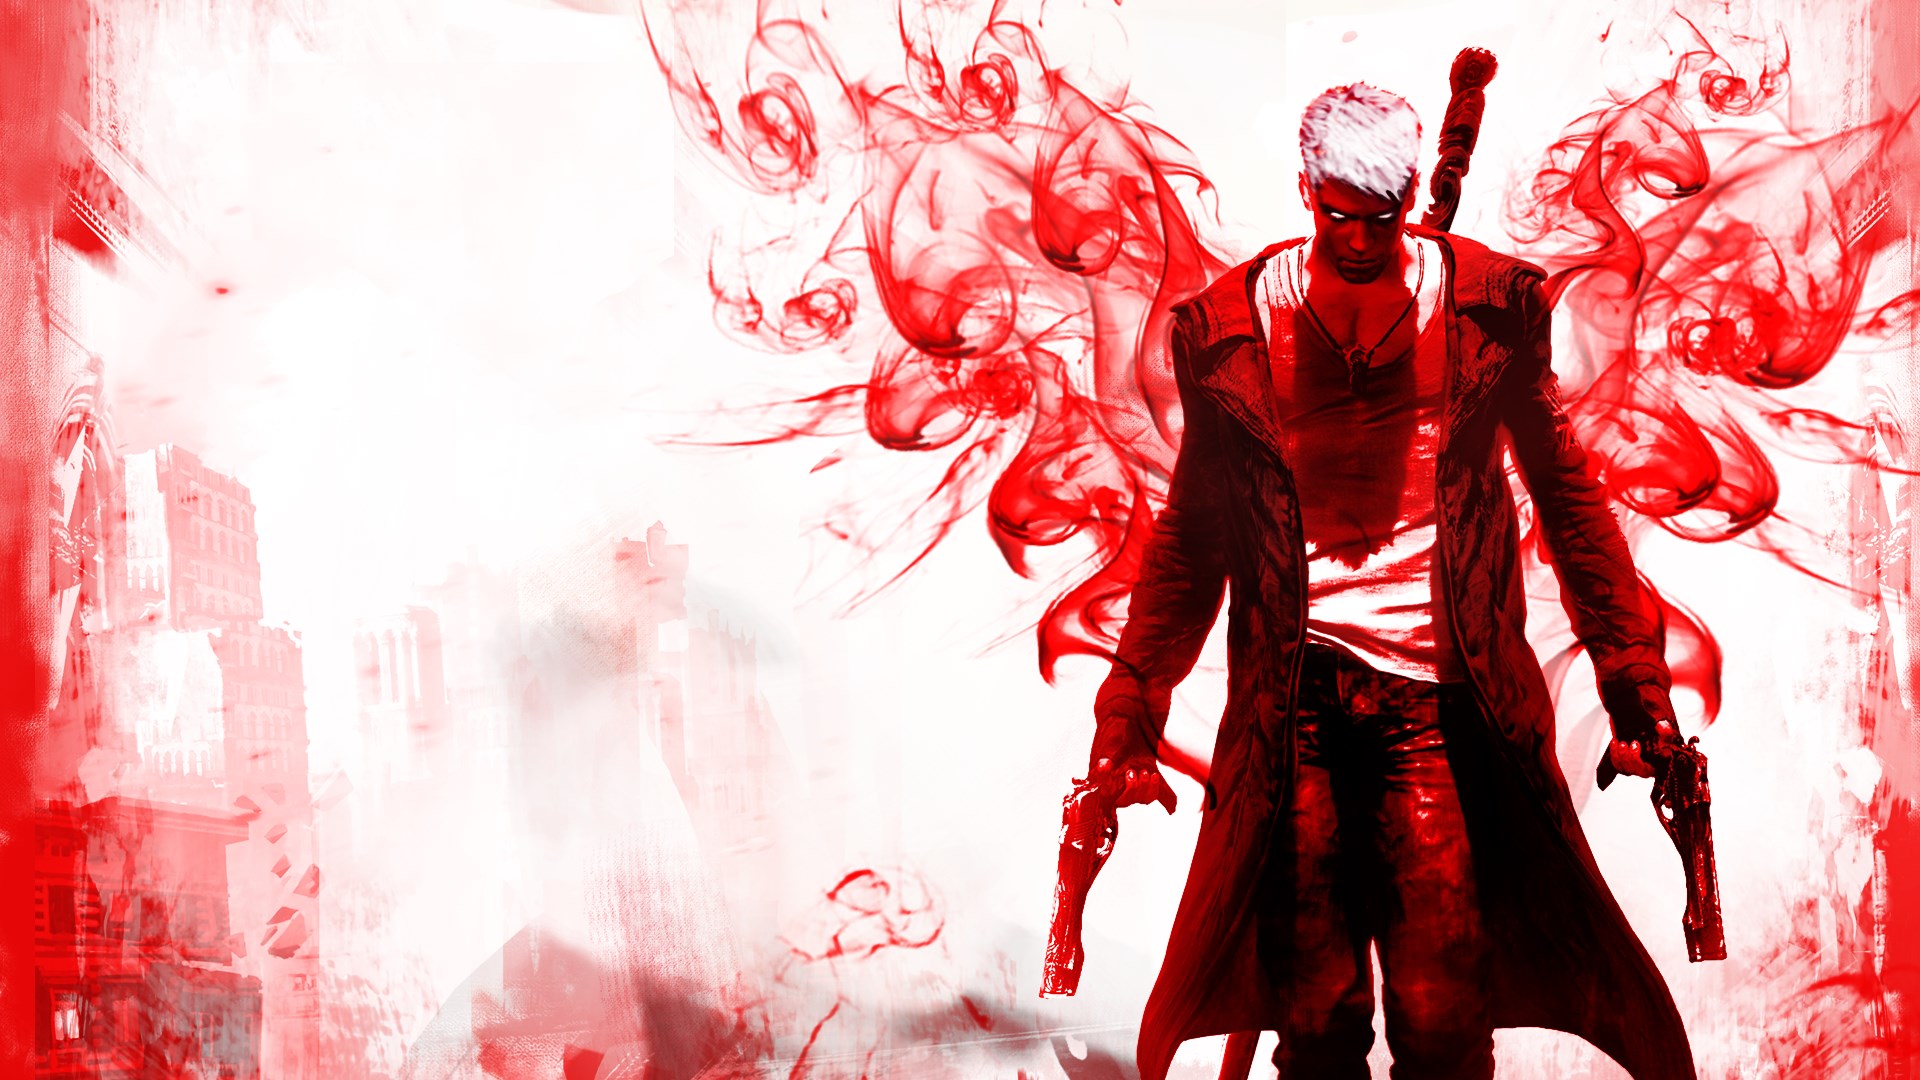 DmC Devil May Cry review